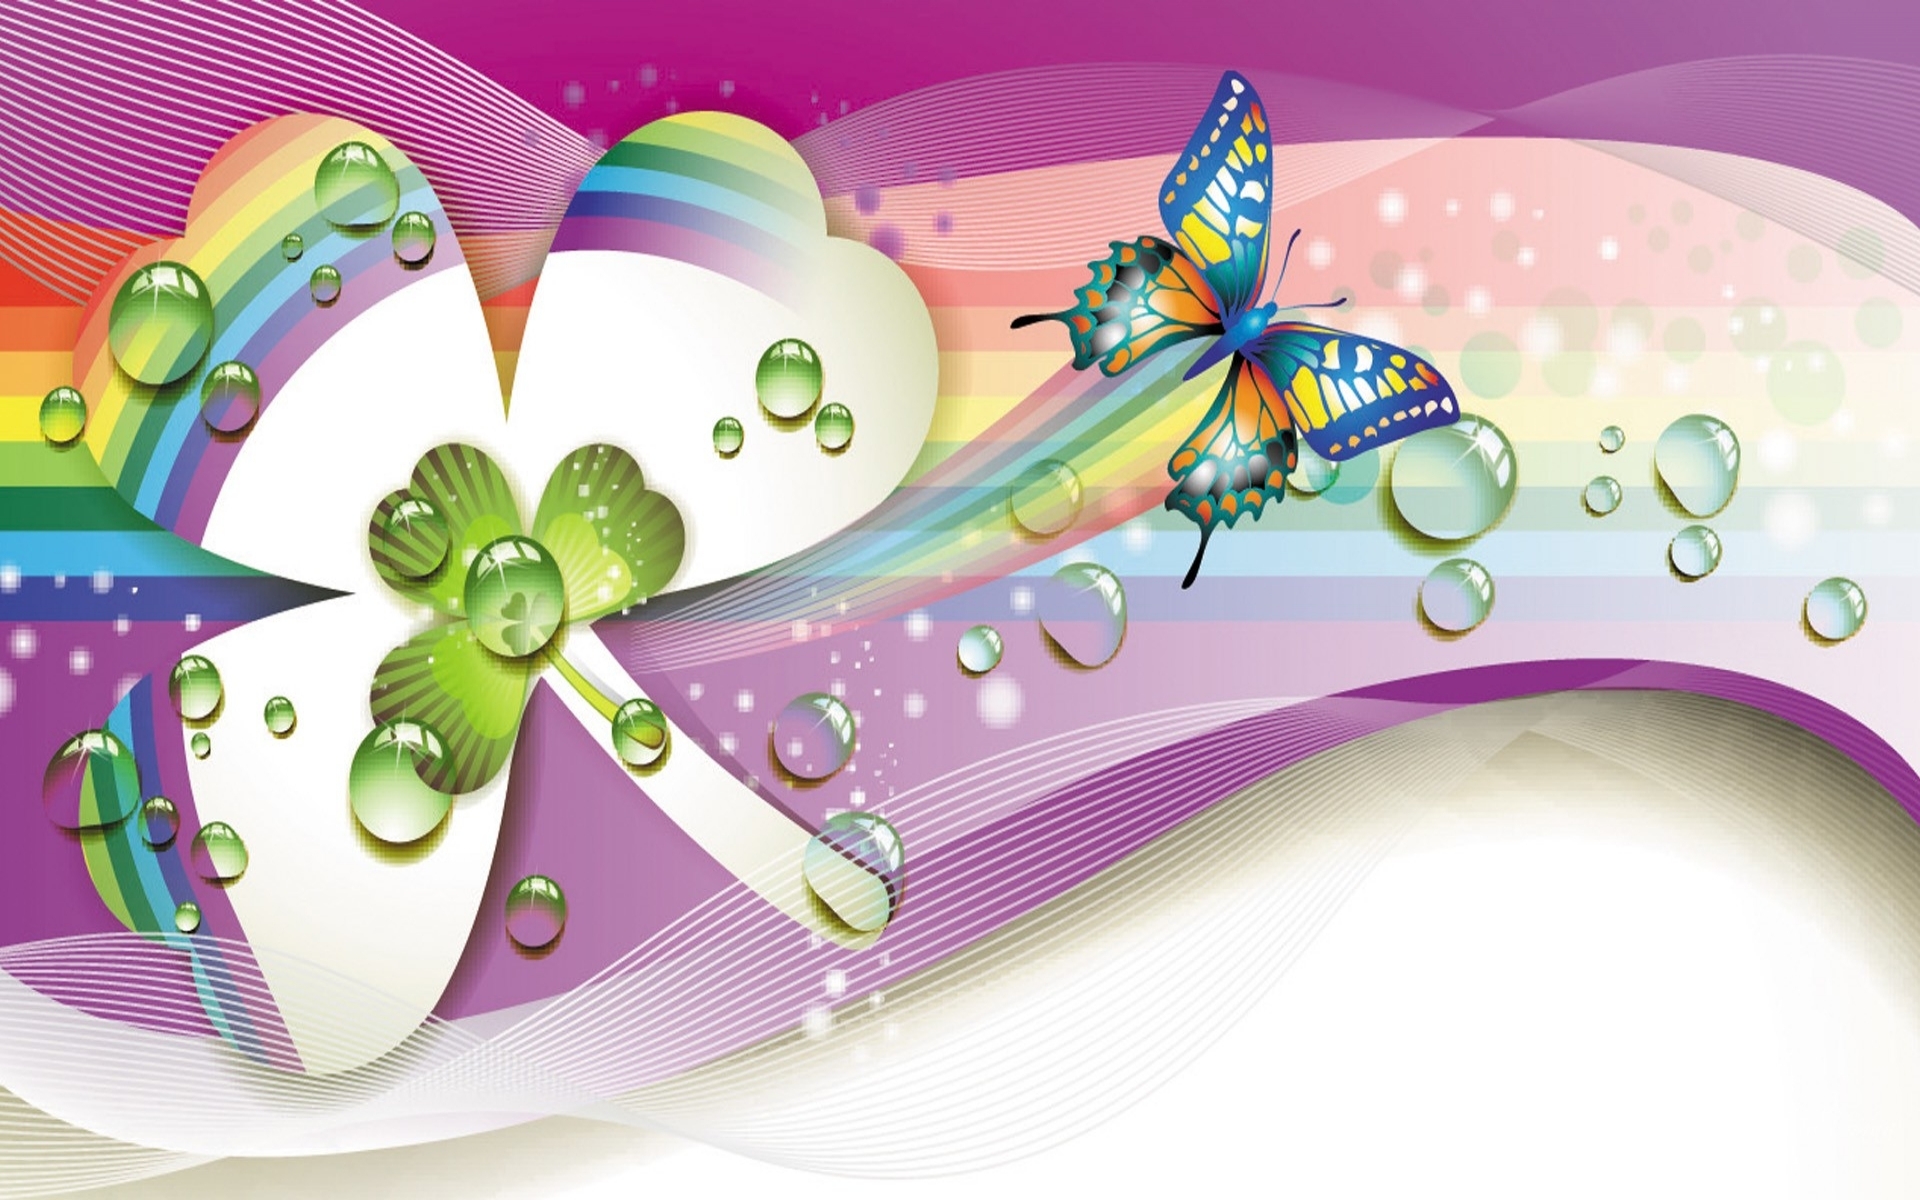 Calico Butterfly & Clover wallpaper. Calico Butterfly & Clover